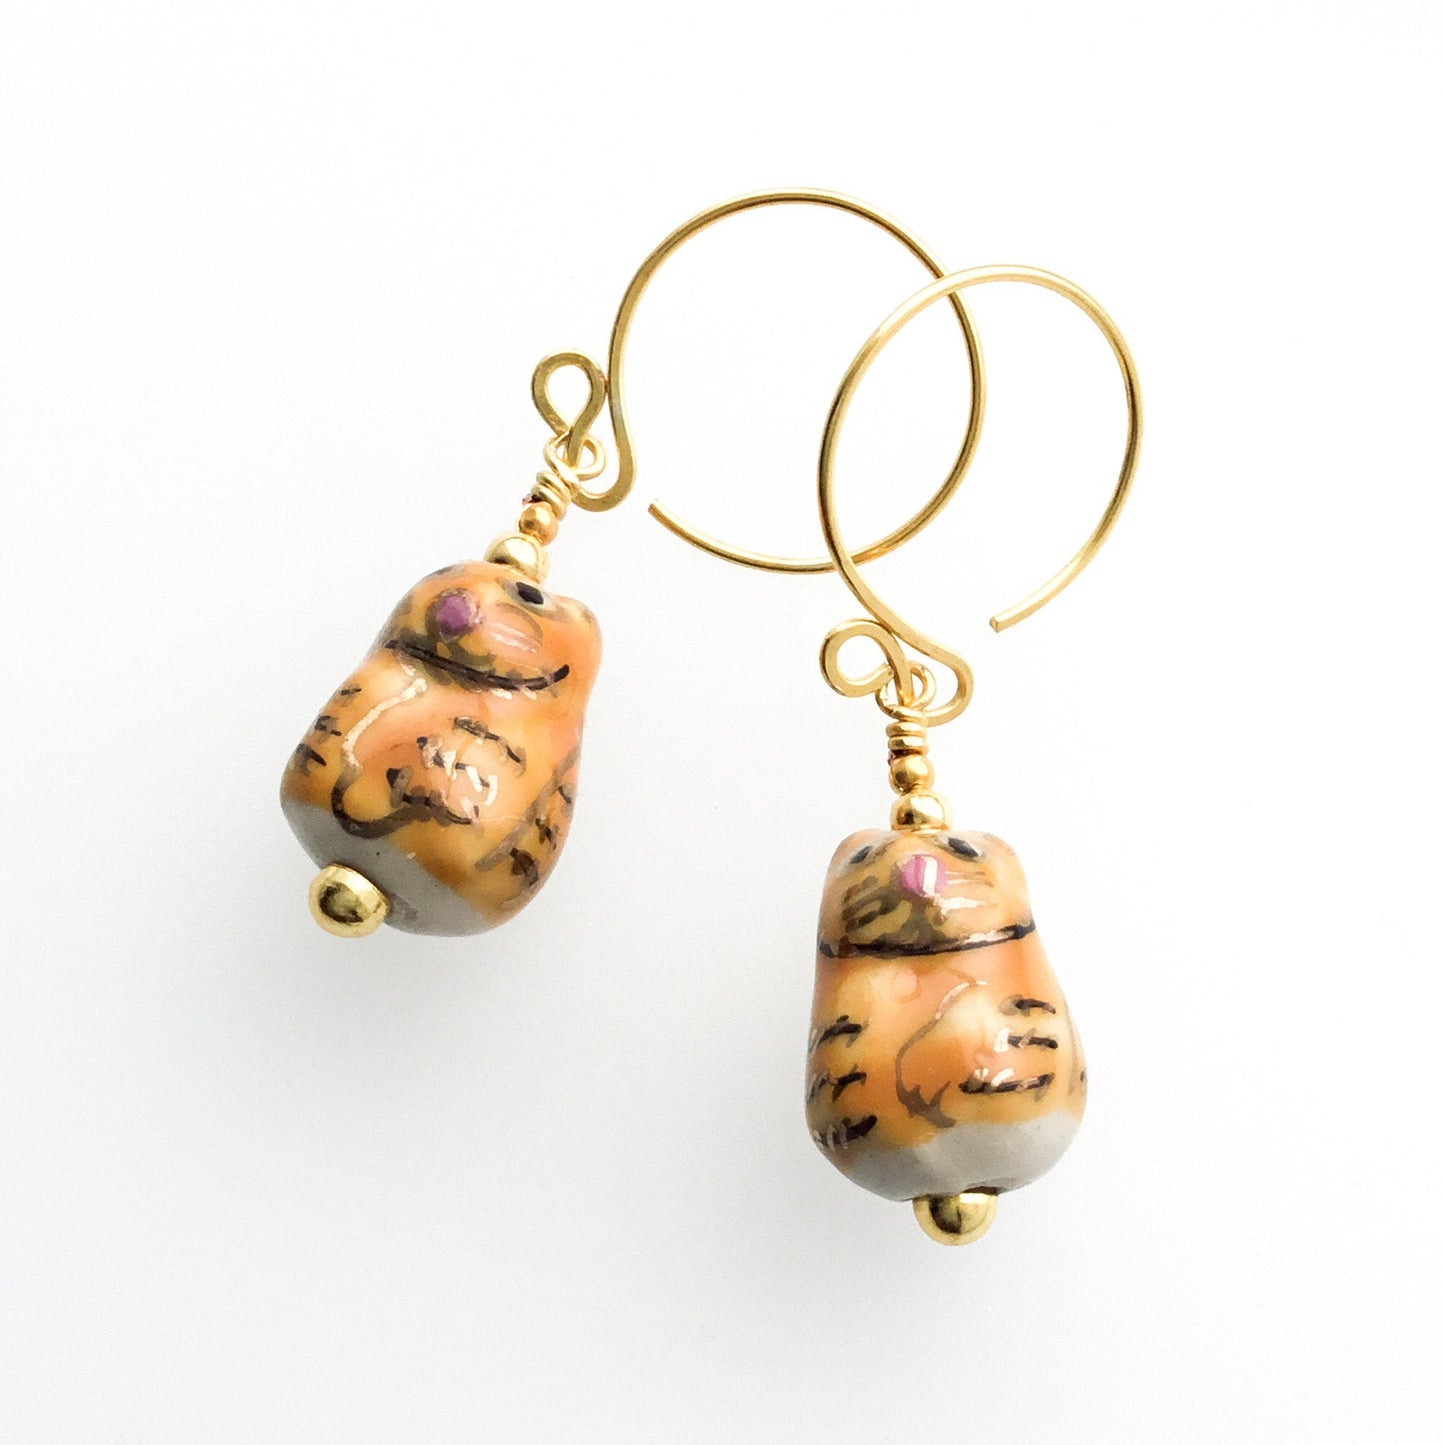 Ginger Tabby Cat Ceramic Earrings. Gold Plated Hand Forged Ear-Wires. Niobium Ear-wire Option - Darkmoon Fayre